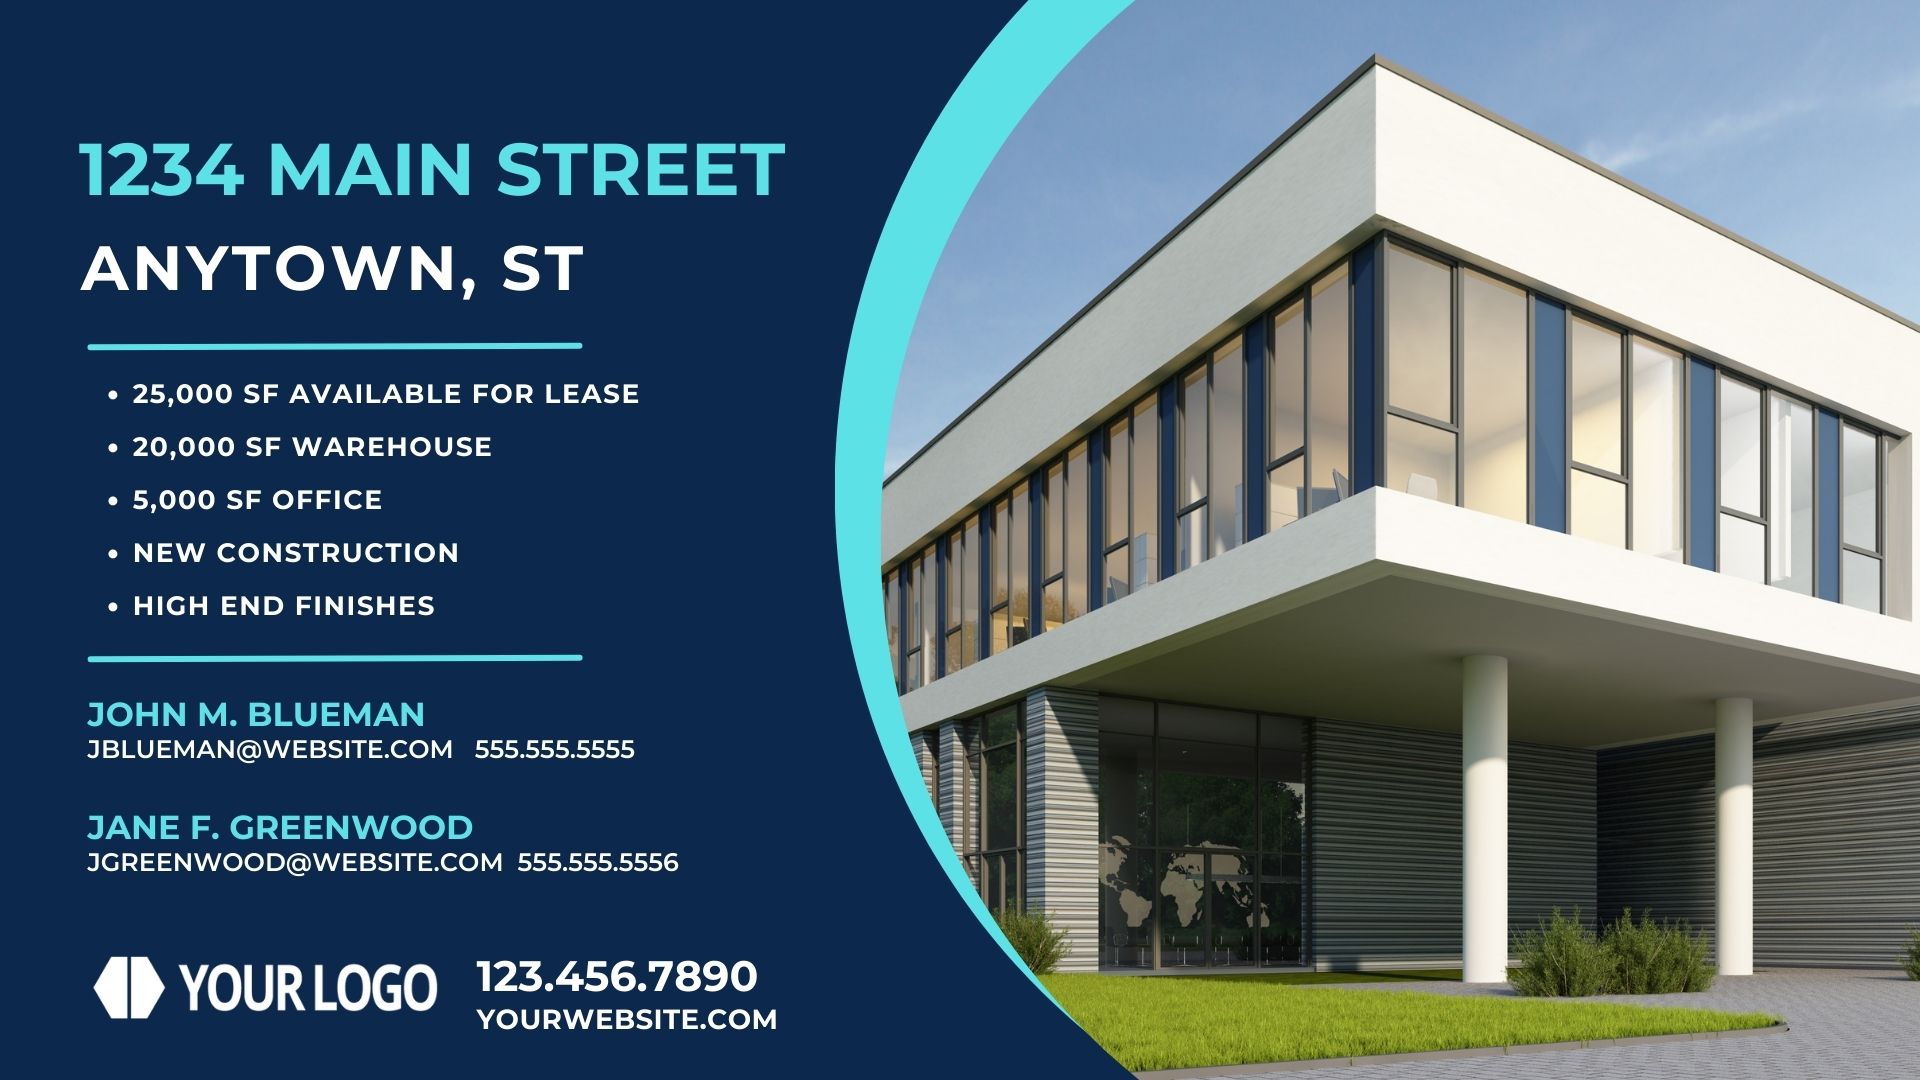 Commercial Real Estate Flyer from Template